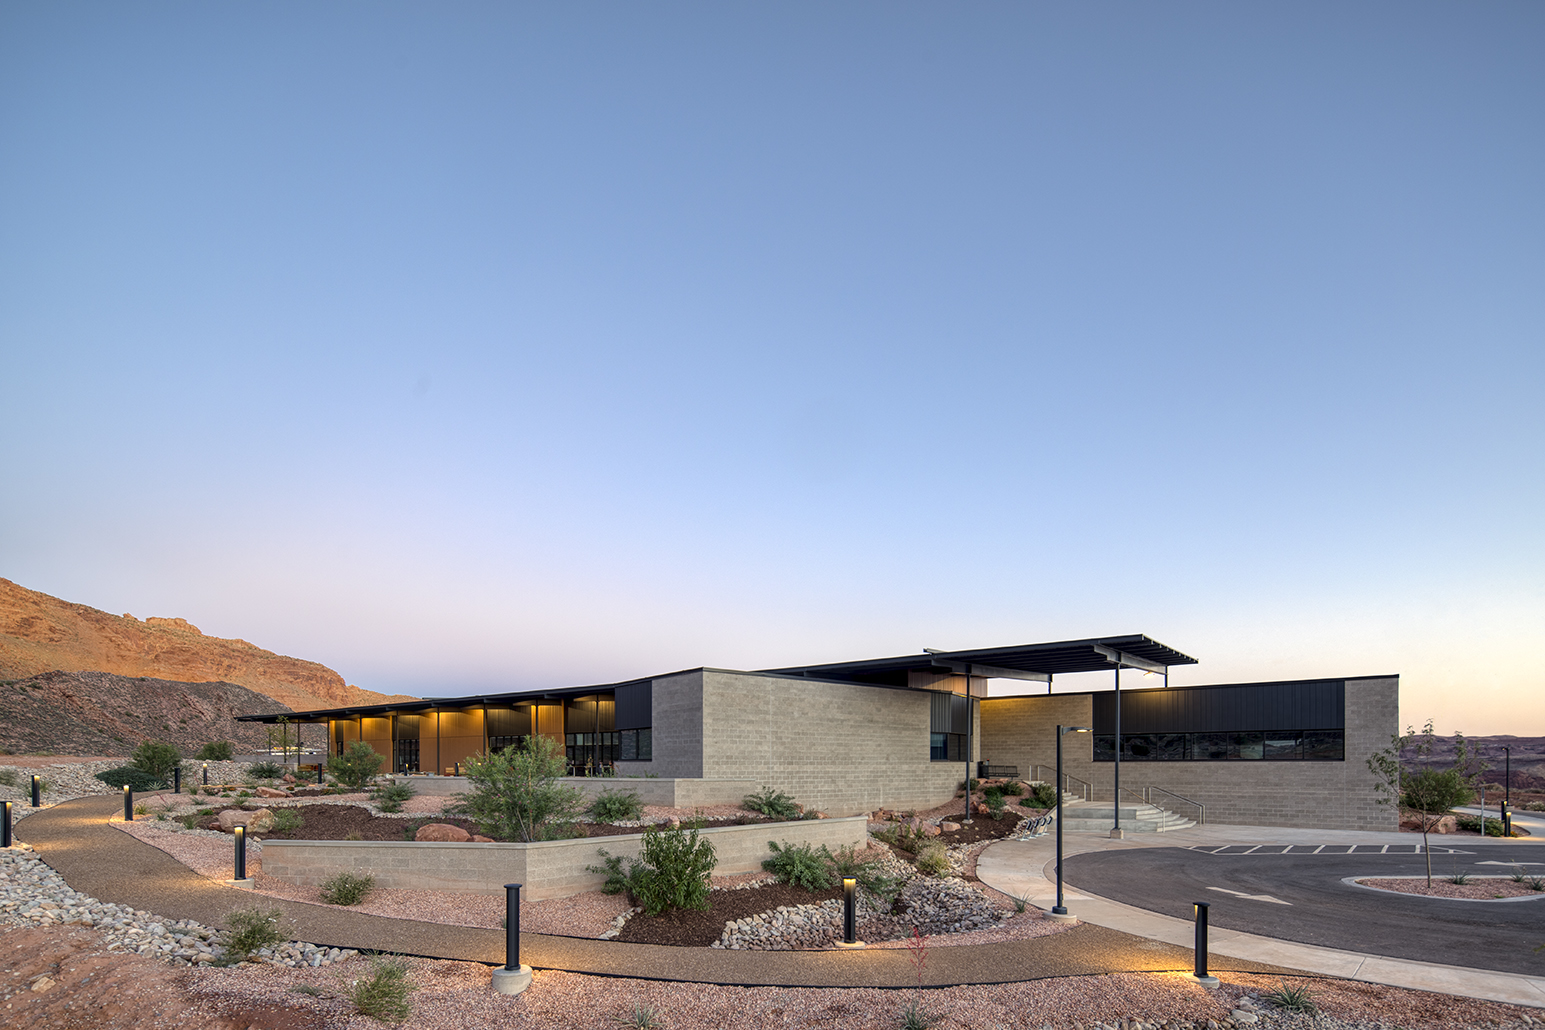 Utah State University, Moab, UT. MHTN Architects.Architectural Photography by: Paul Richer / RICHER IMAGES